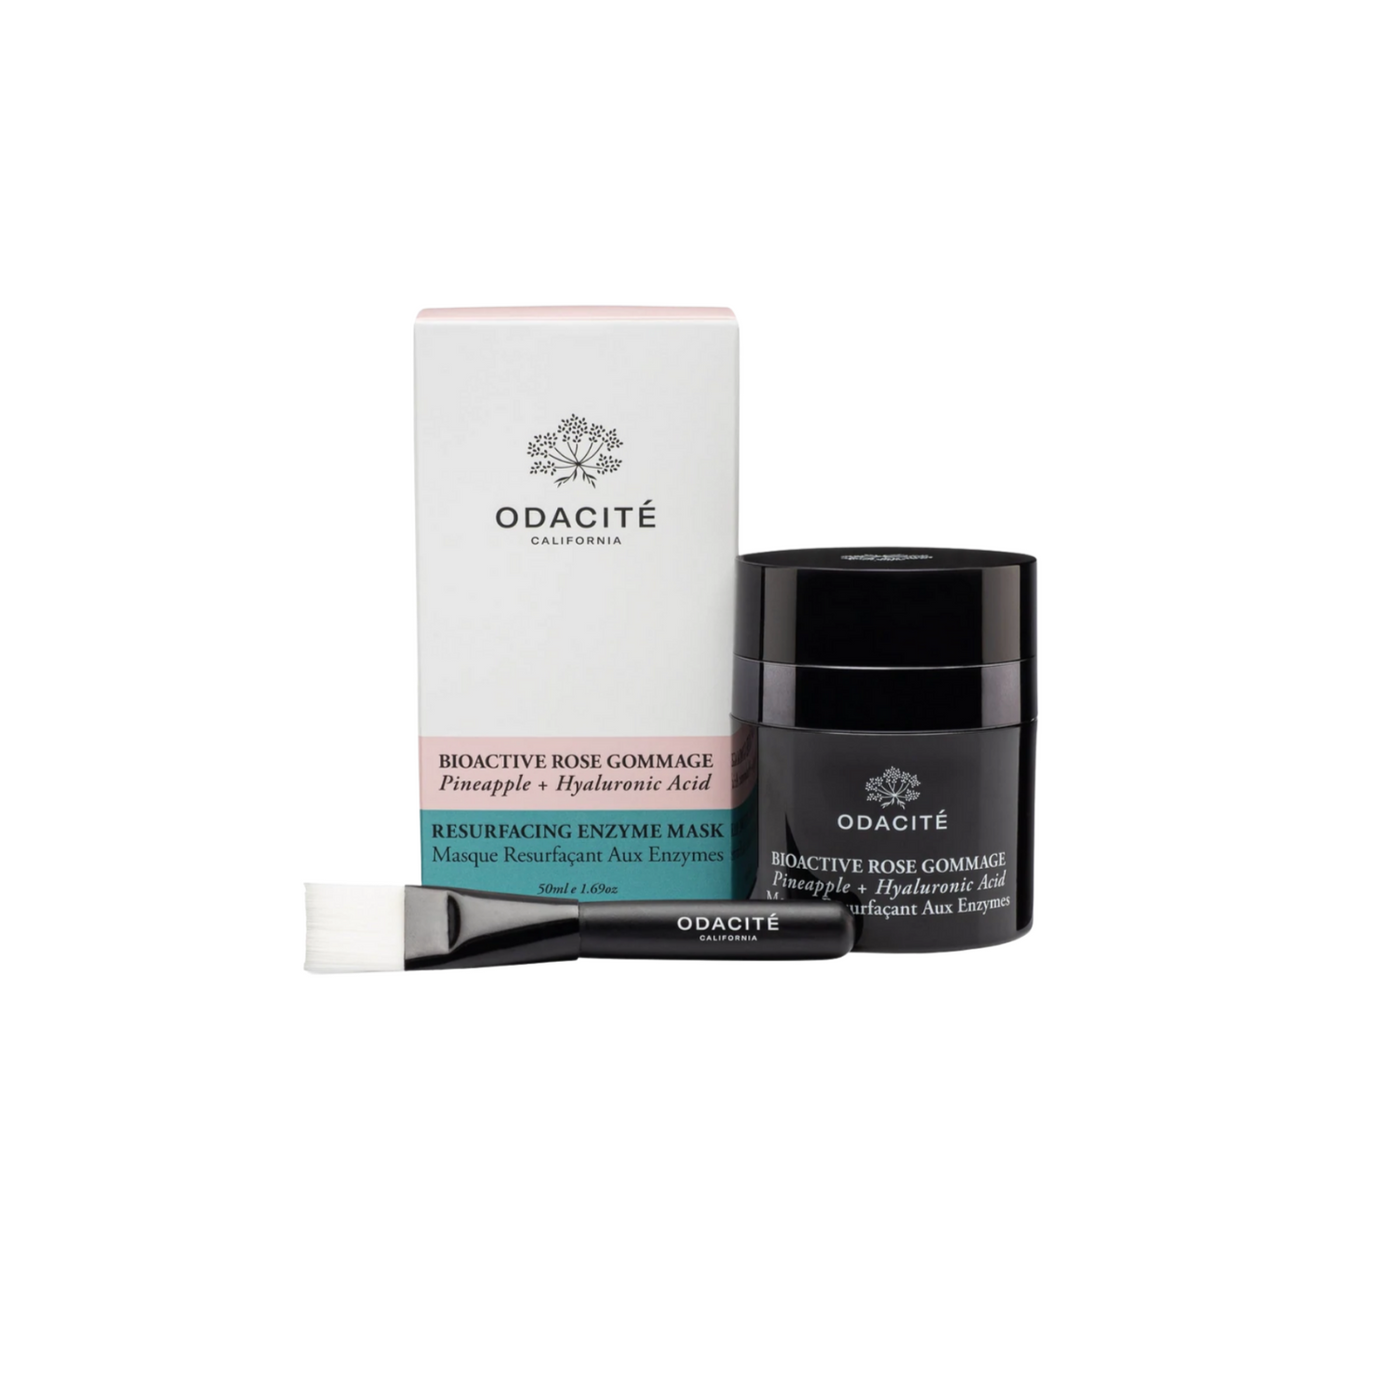 Laurel & Reed Clean Beauty Store - ODACITE Bioactive Rose Gommage 	